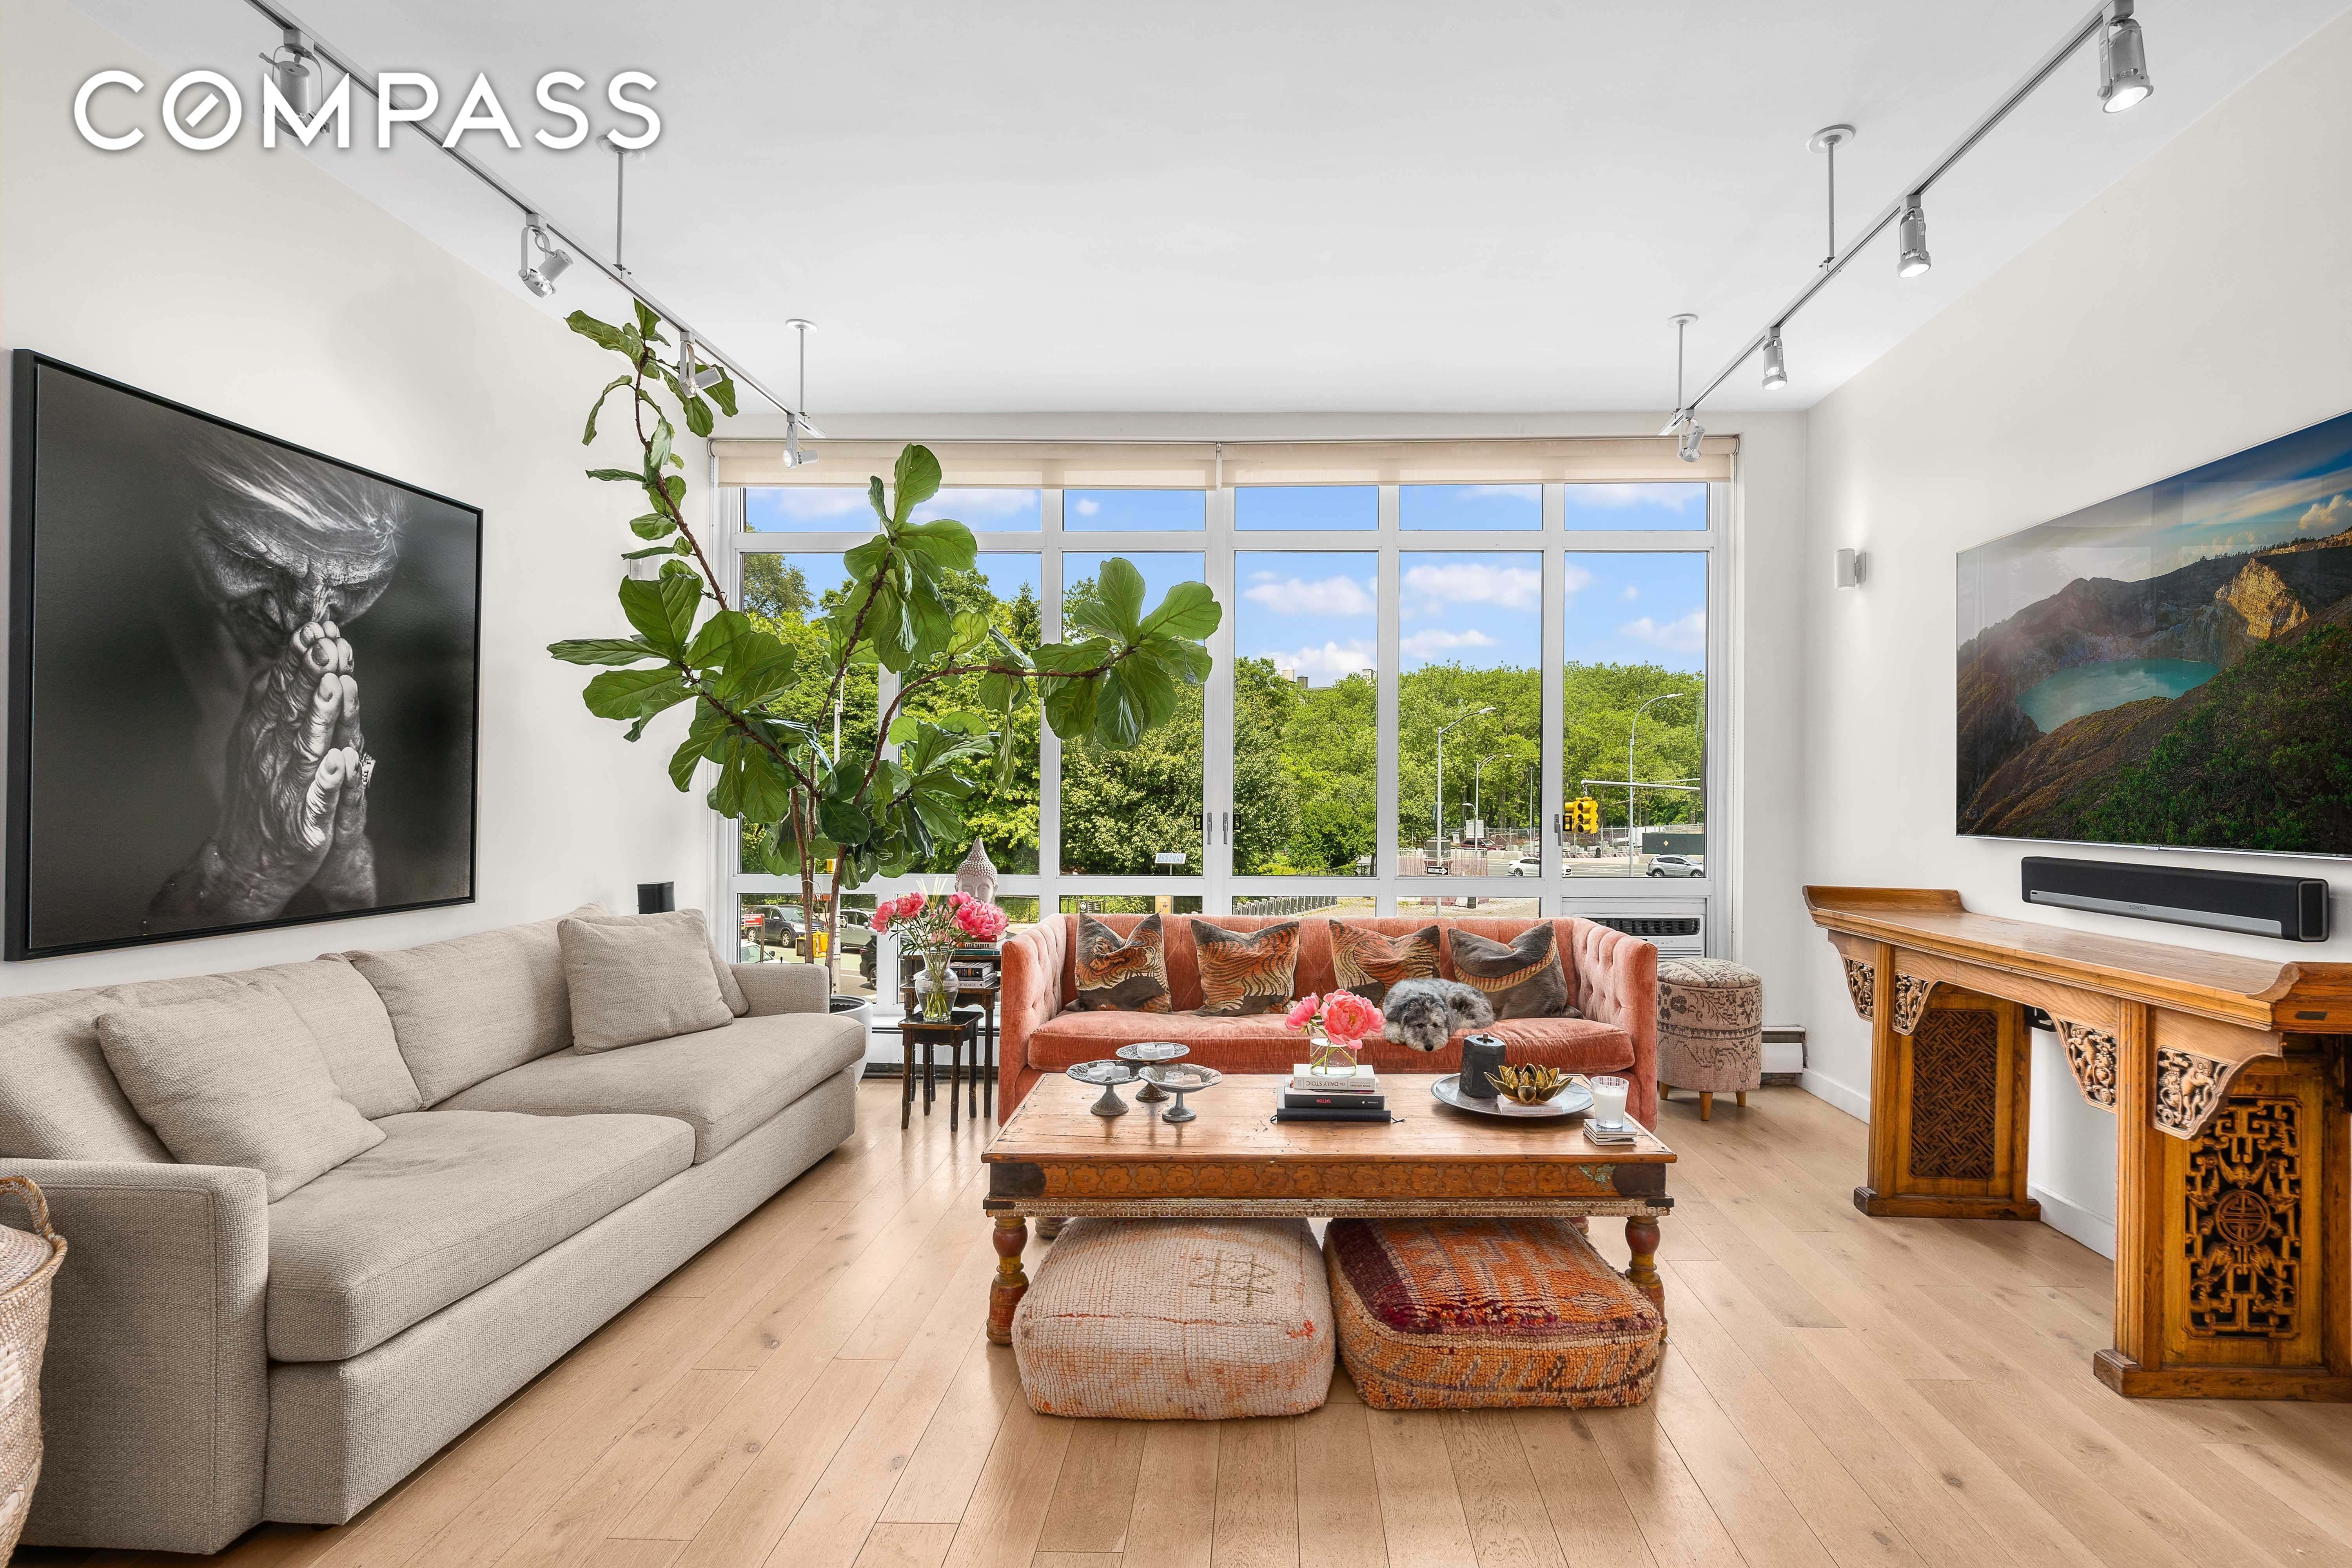 Property at 920 UNION ST, 2F Park Slope, Brooklyn, New York 11215